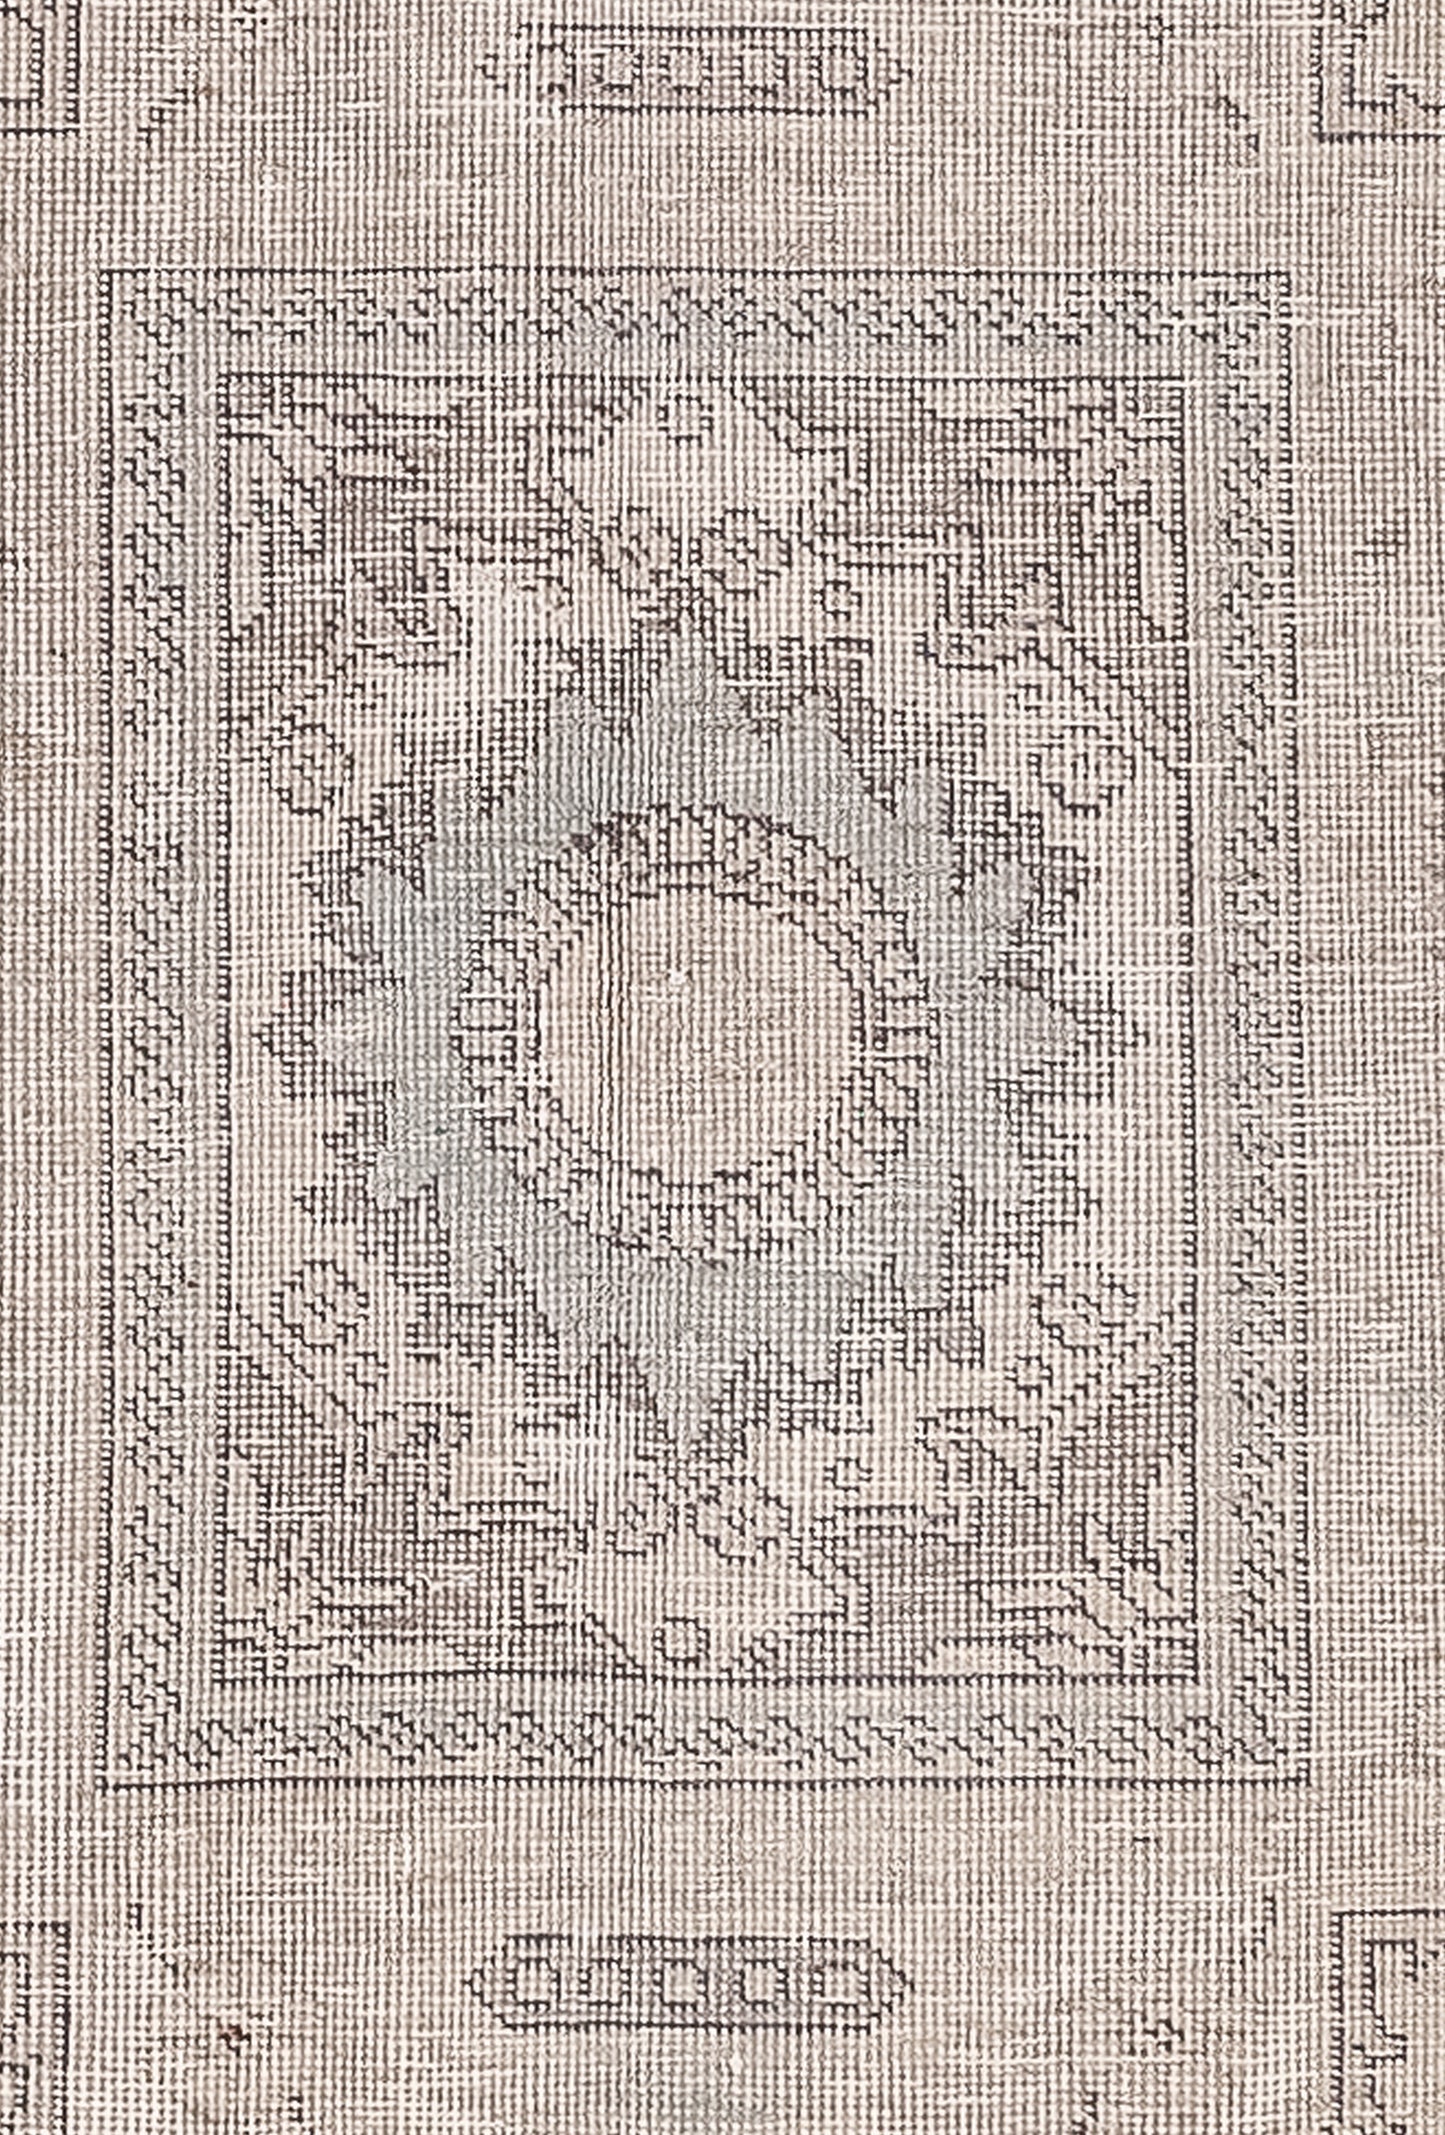 The close-up of the carpet shows a rectangle supporting a nested one and its center has mandalas with a circle as the focal area.